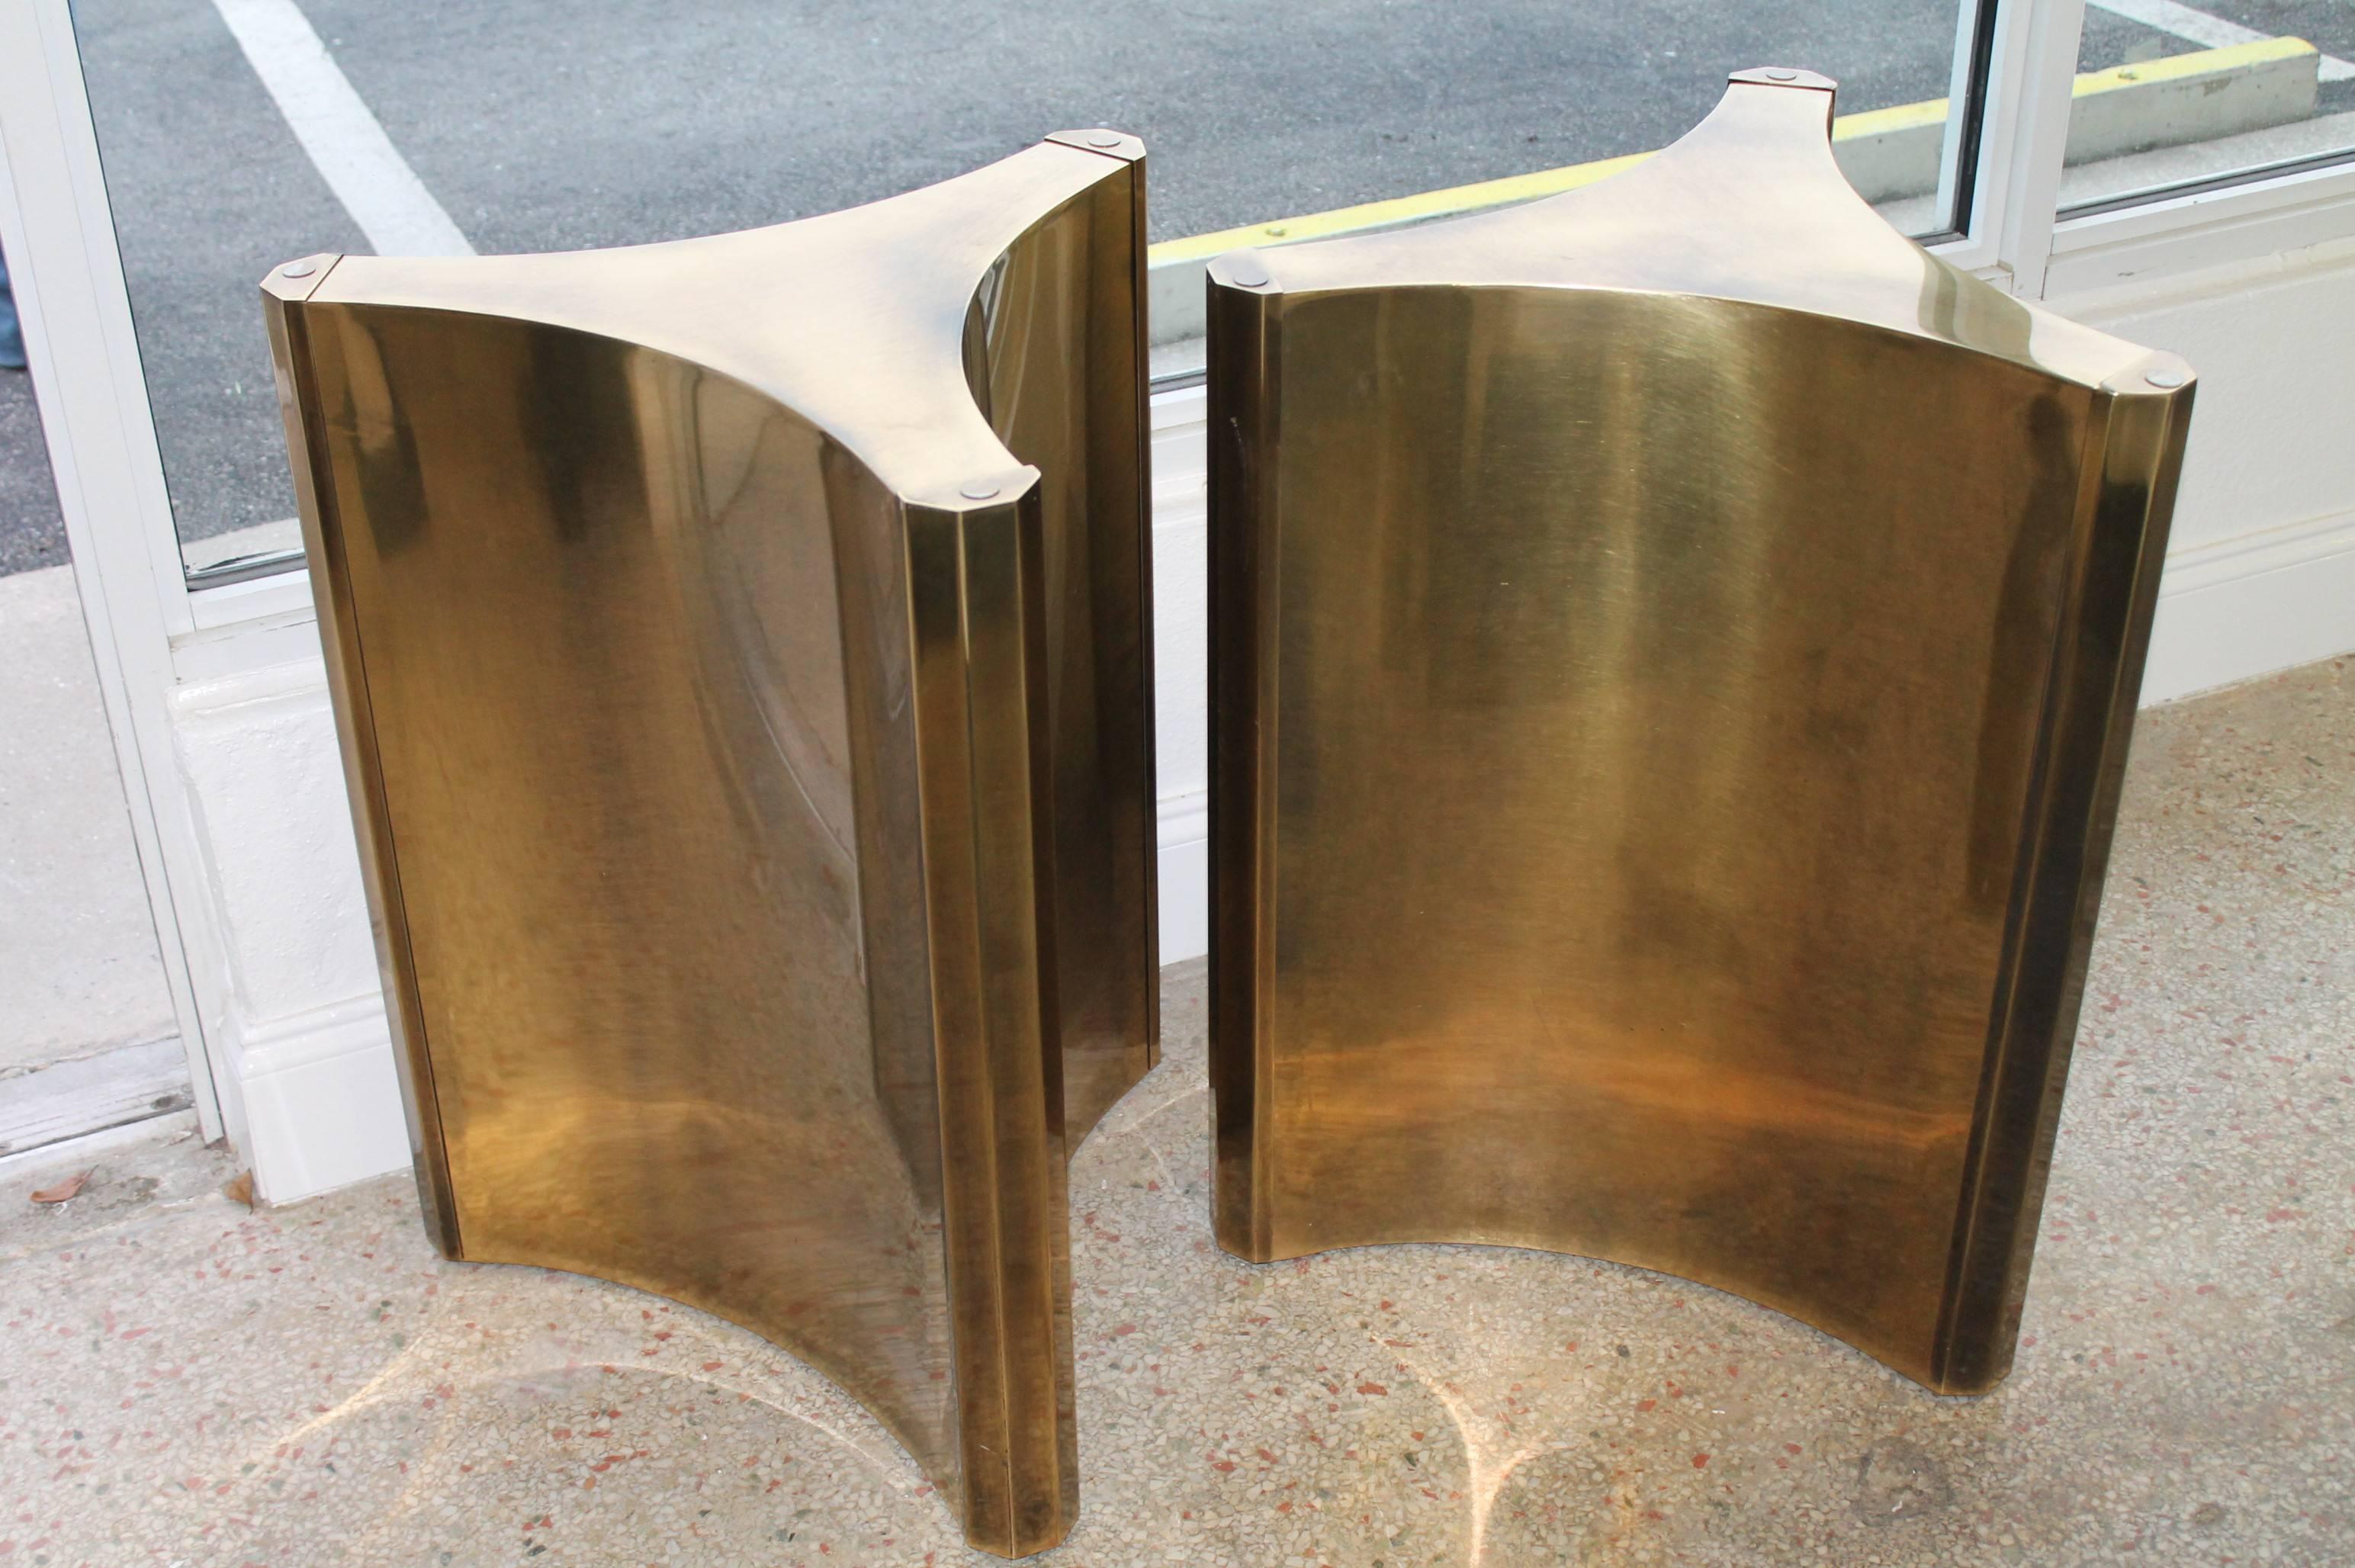 Vintage pair of brass Mastercraft pedestal trilobi bases. These can be used as a dining table, desk or console table. Glass top not included.